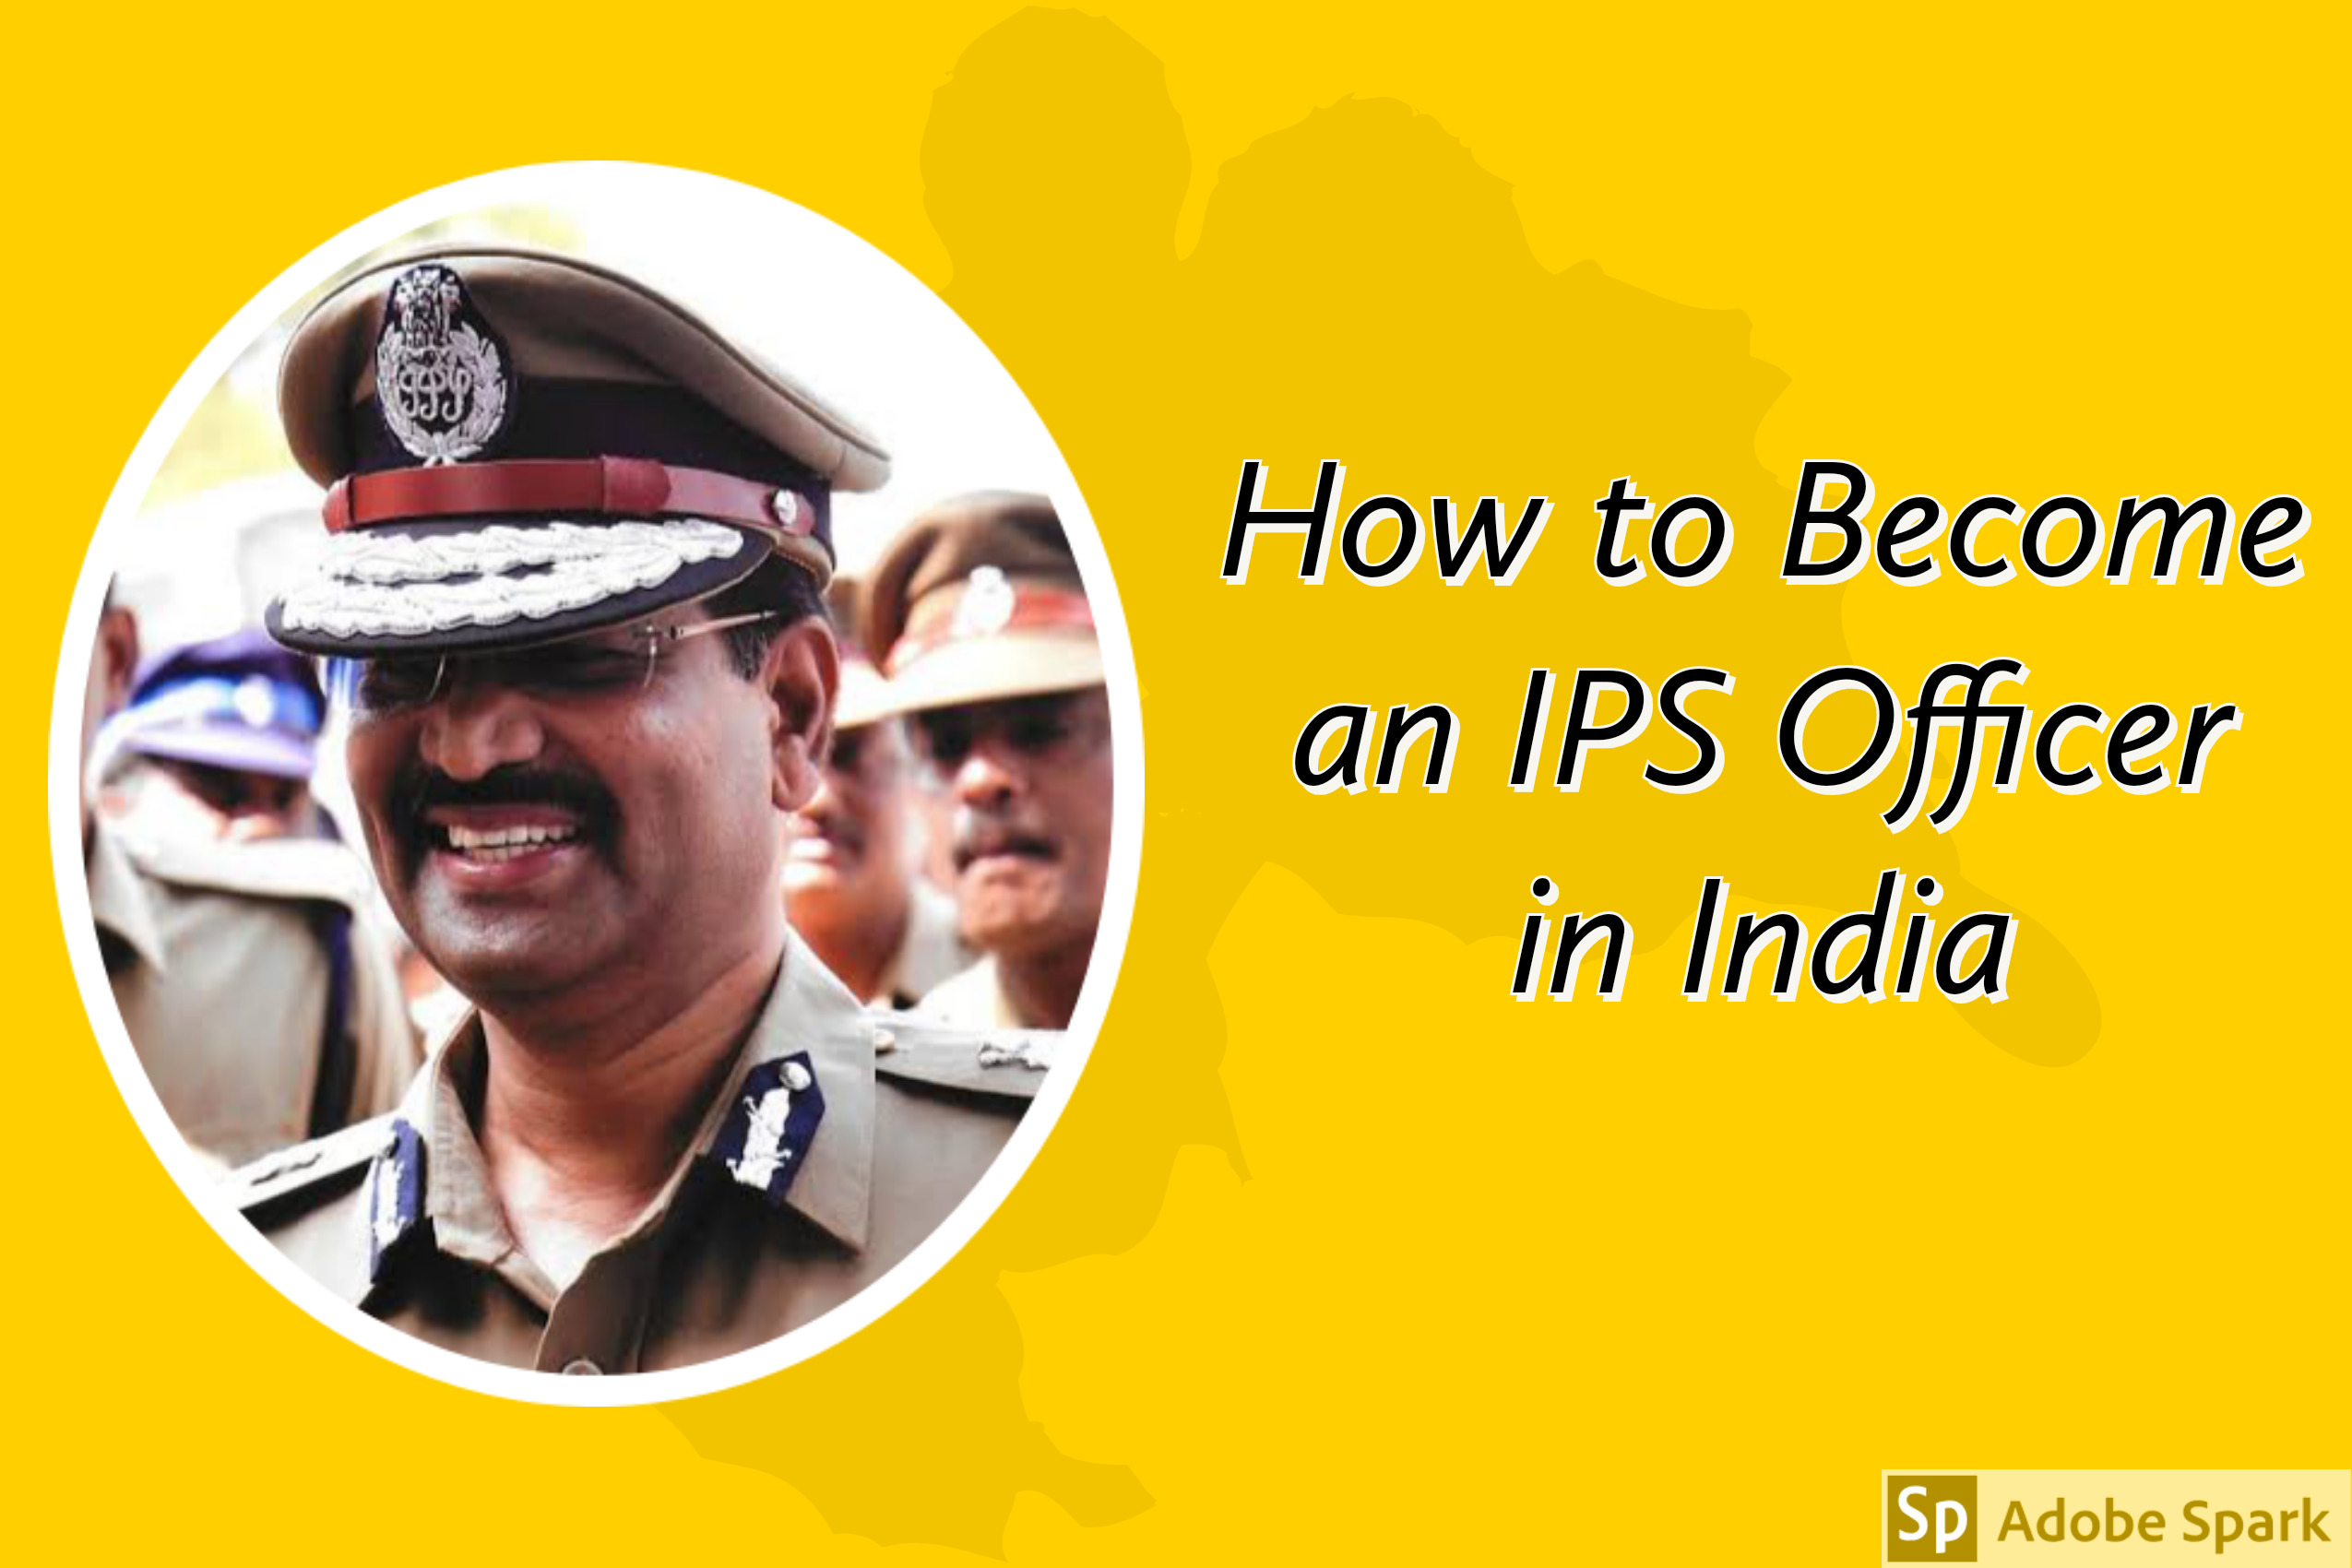 How to Become an IPS Officer in India